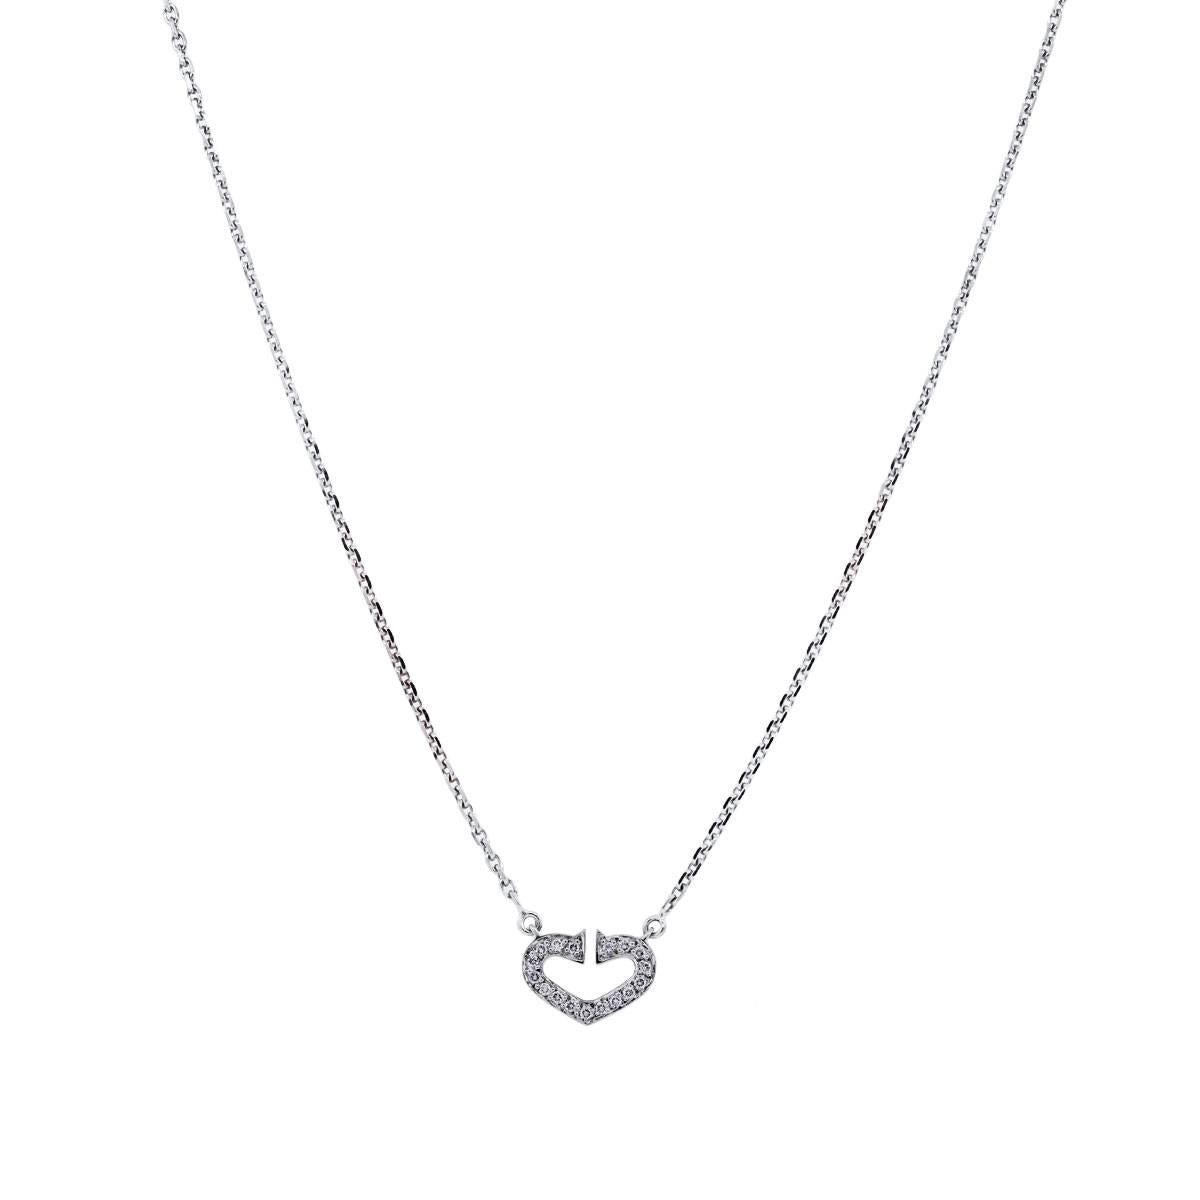 Designer: Cartier
Metal: 18k white gold
Diamond Details: Approximately 0.09ctw of brilliant cut diamonds. Diamonds are F/G in color and VS in clarity.
Necklace Length: 15.25